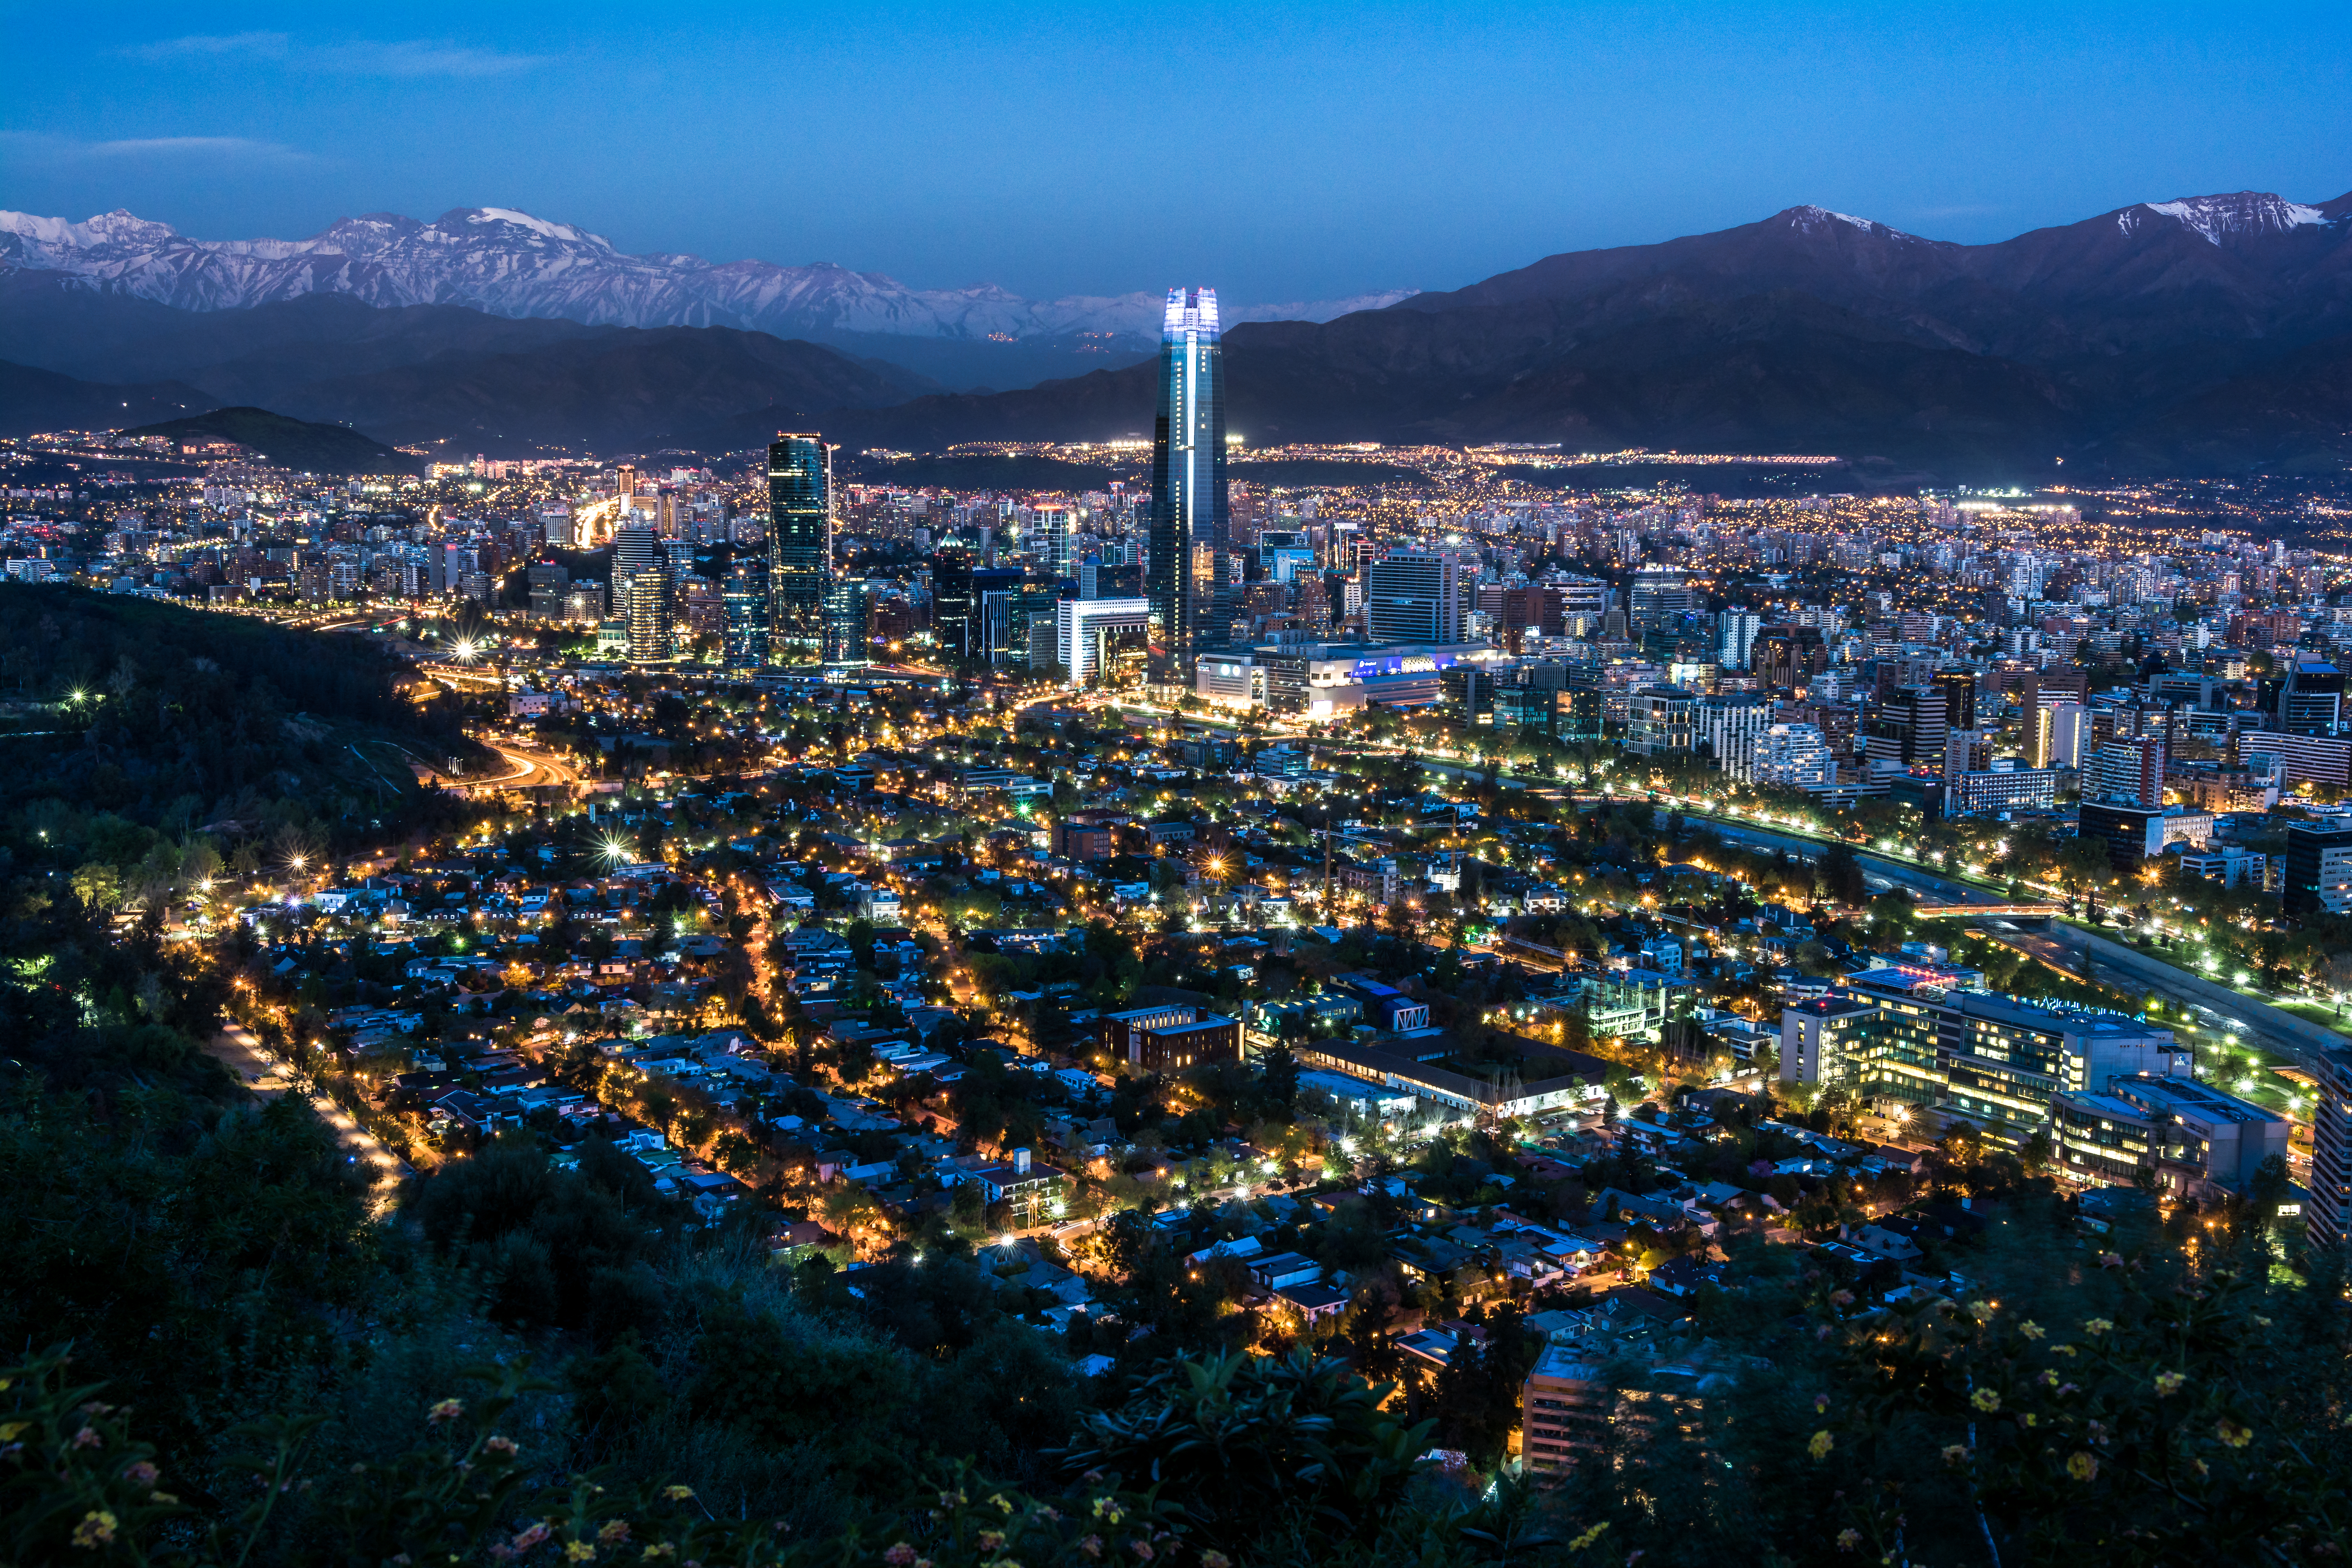 chile, cities, mountains, lights, night city